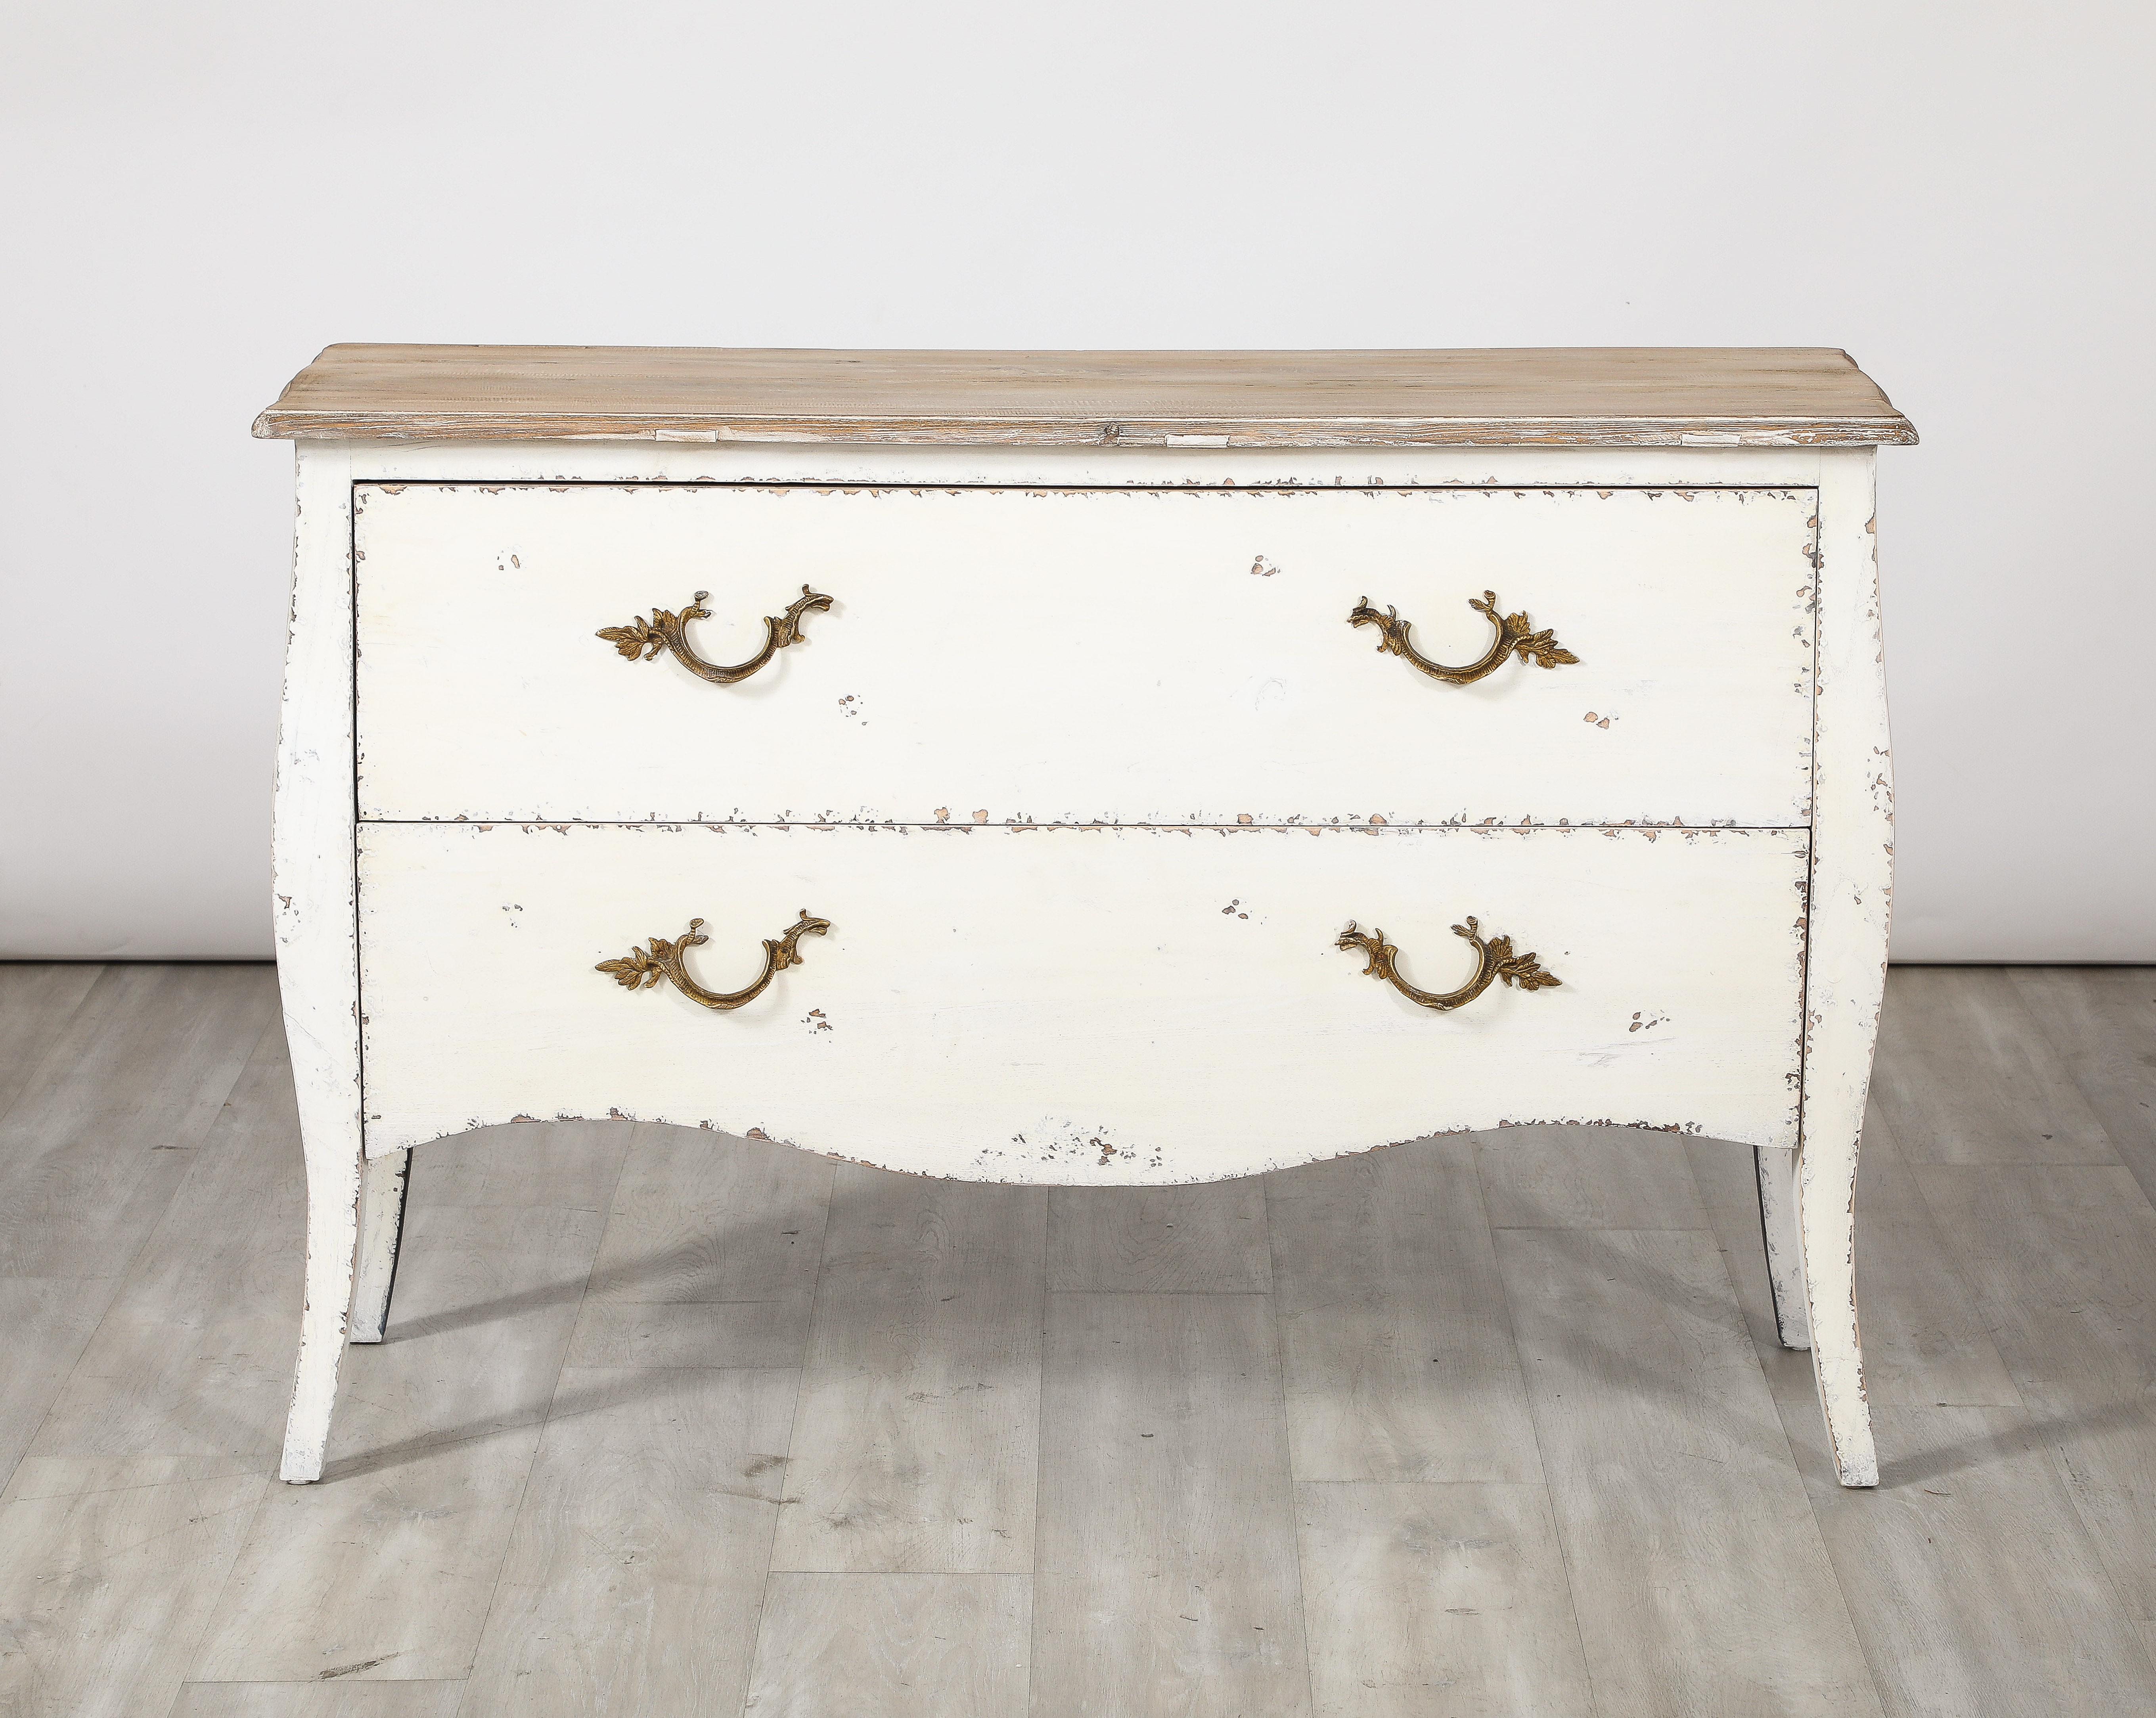 An Italian Rococo manner painted white commode.  The shapely chest comprises two-drawers with fanciful bronze handles supported on cabriole legs.   An exuberant and elegant shape which contrasts nicely with the creamy white painted finish, making it